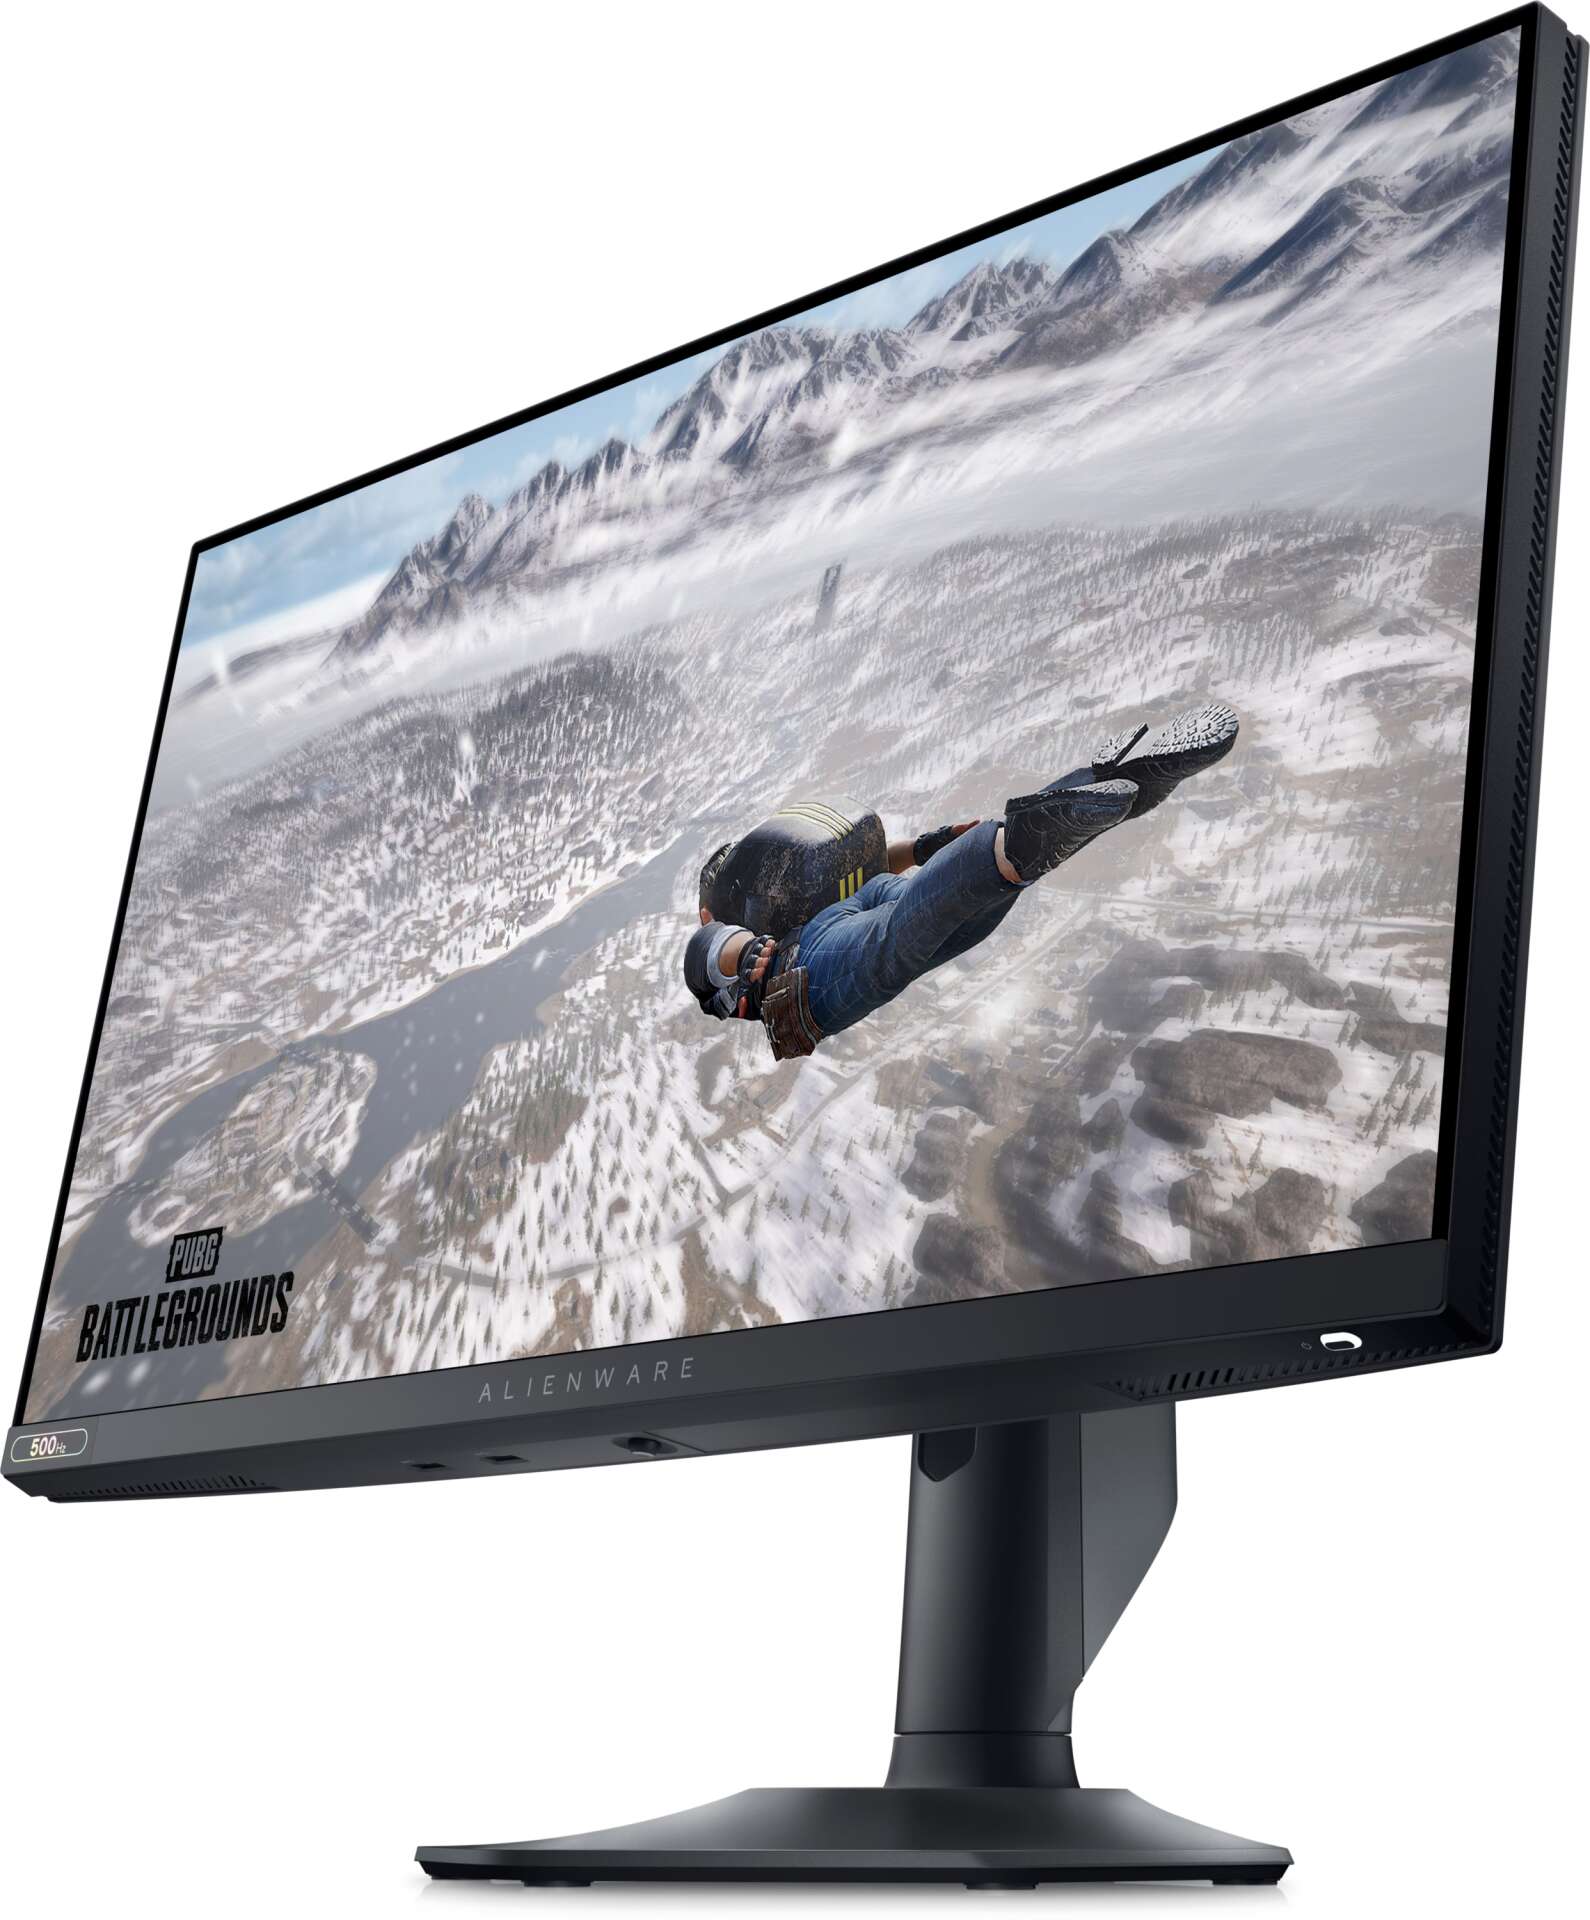 Dell 24.5" aw2524hf alienware gaming monitor